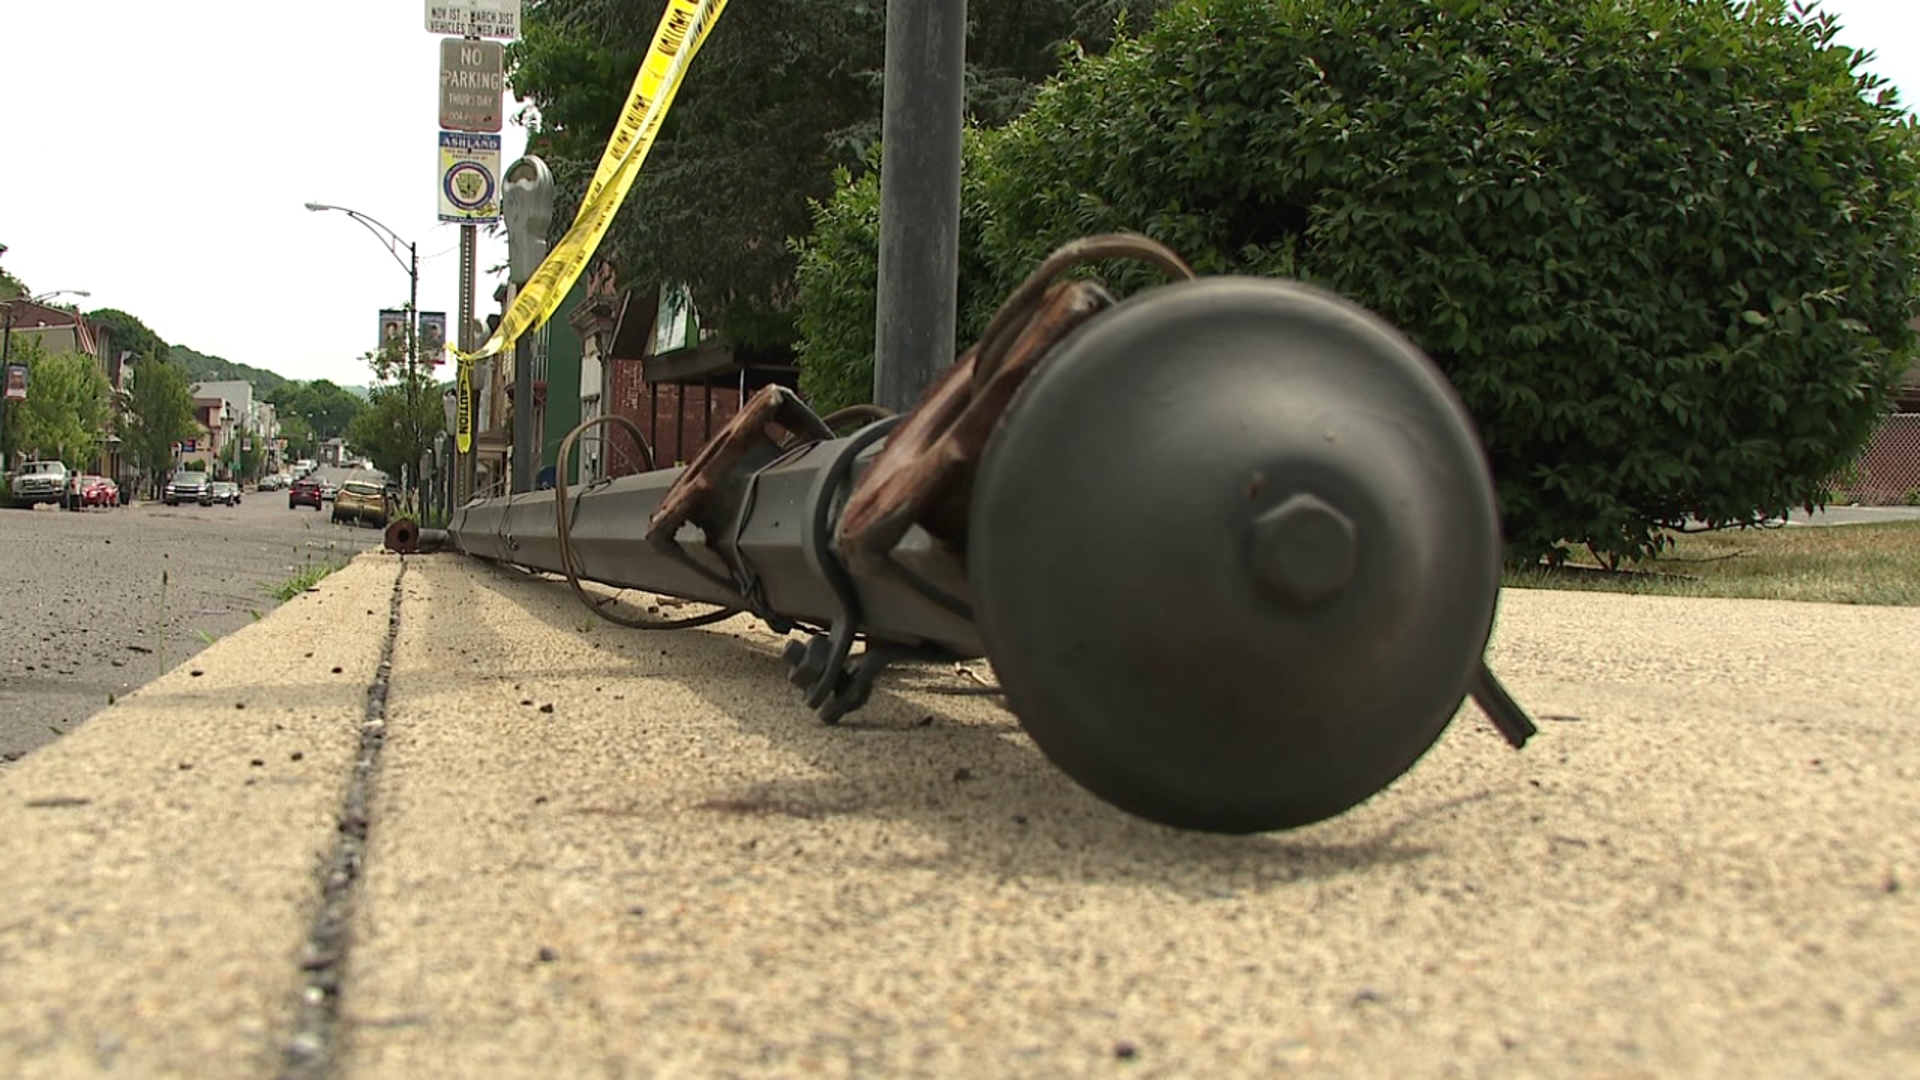 Concern in Schuylkill County after multiple streetlights have fallen down. Newswatch 16's Melissa Steininger explains the situation on Centre Street.